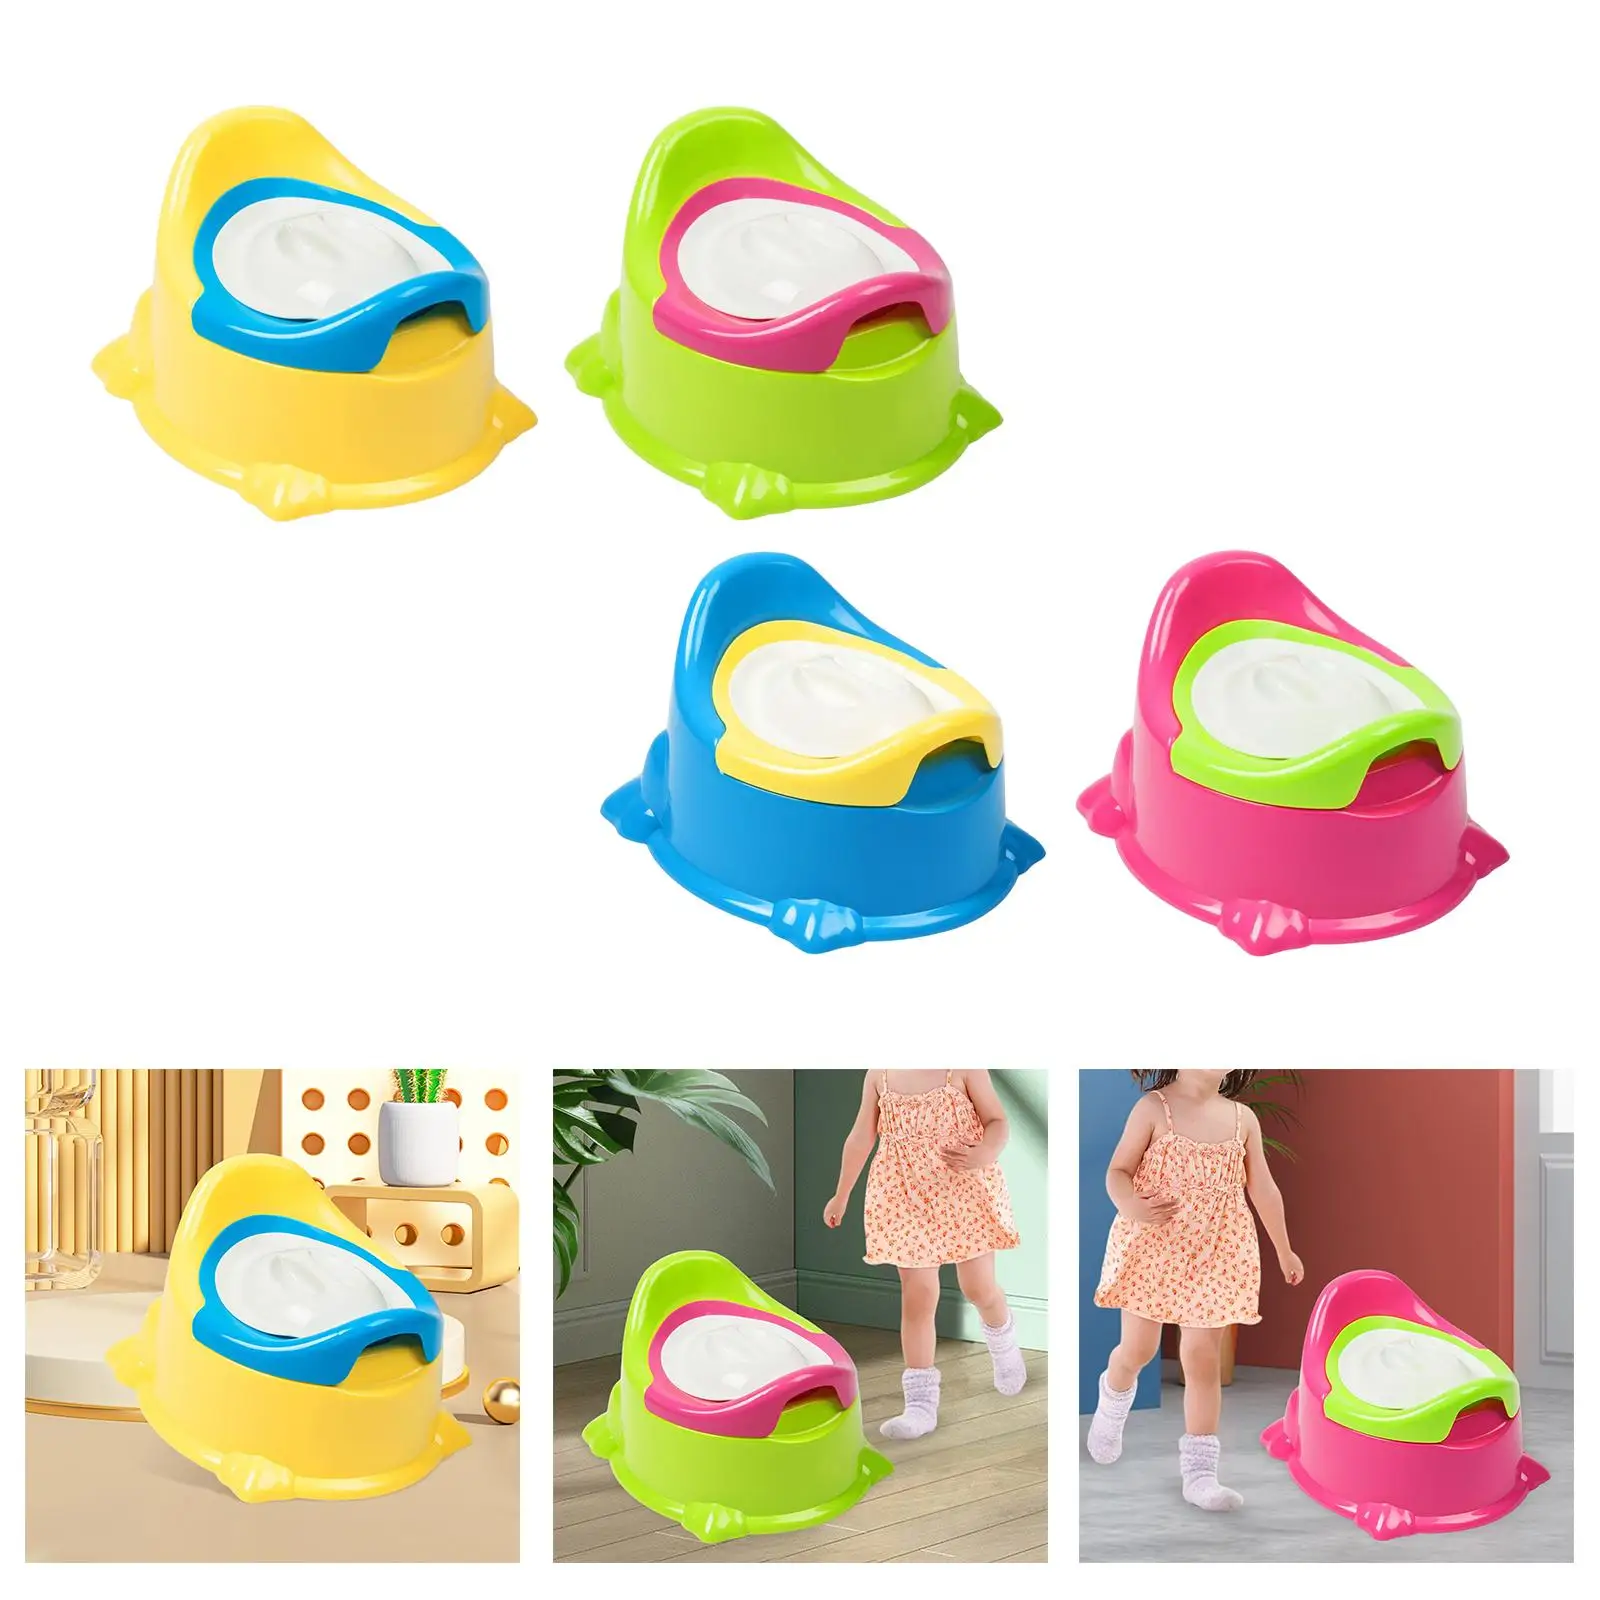 Child Potty Kids Training Toilet Seat Easy Clean Potty Trainer Toilet Chair Seat for Babies 6-12 Month Camping